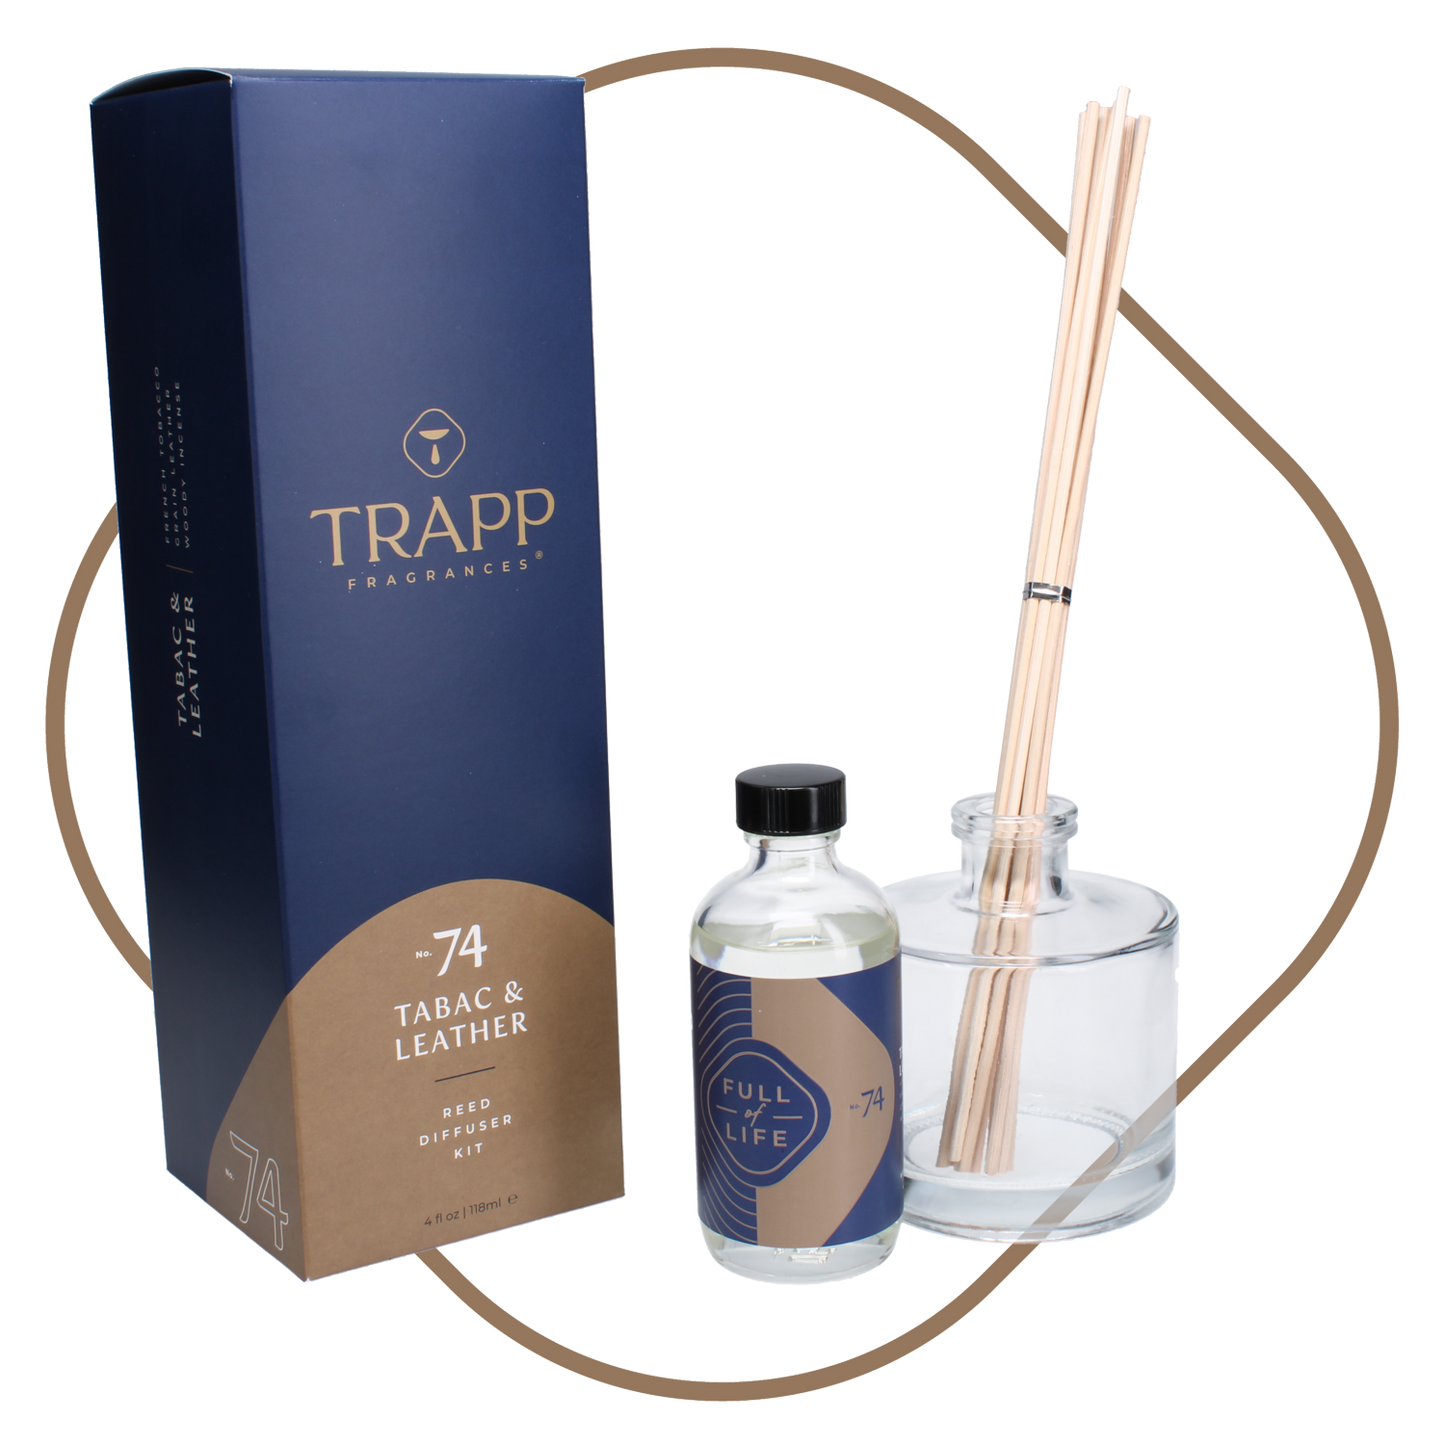 No. 74 Tabac & Leather 4 oz. Reed Diffuser Kit